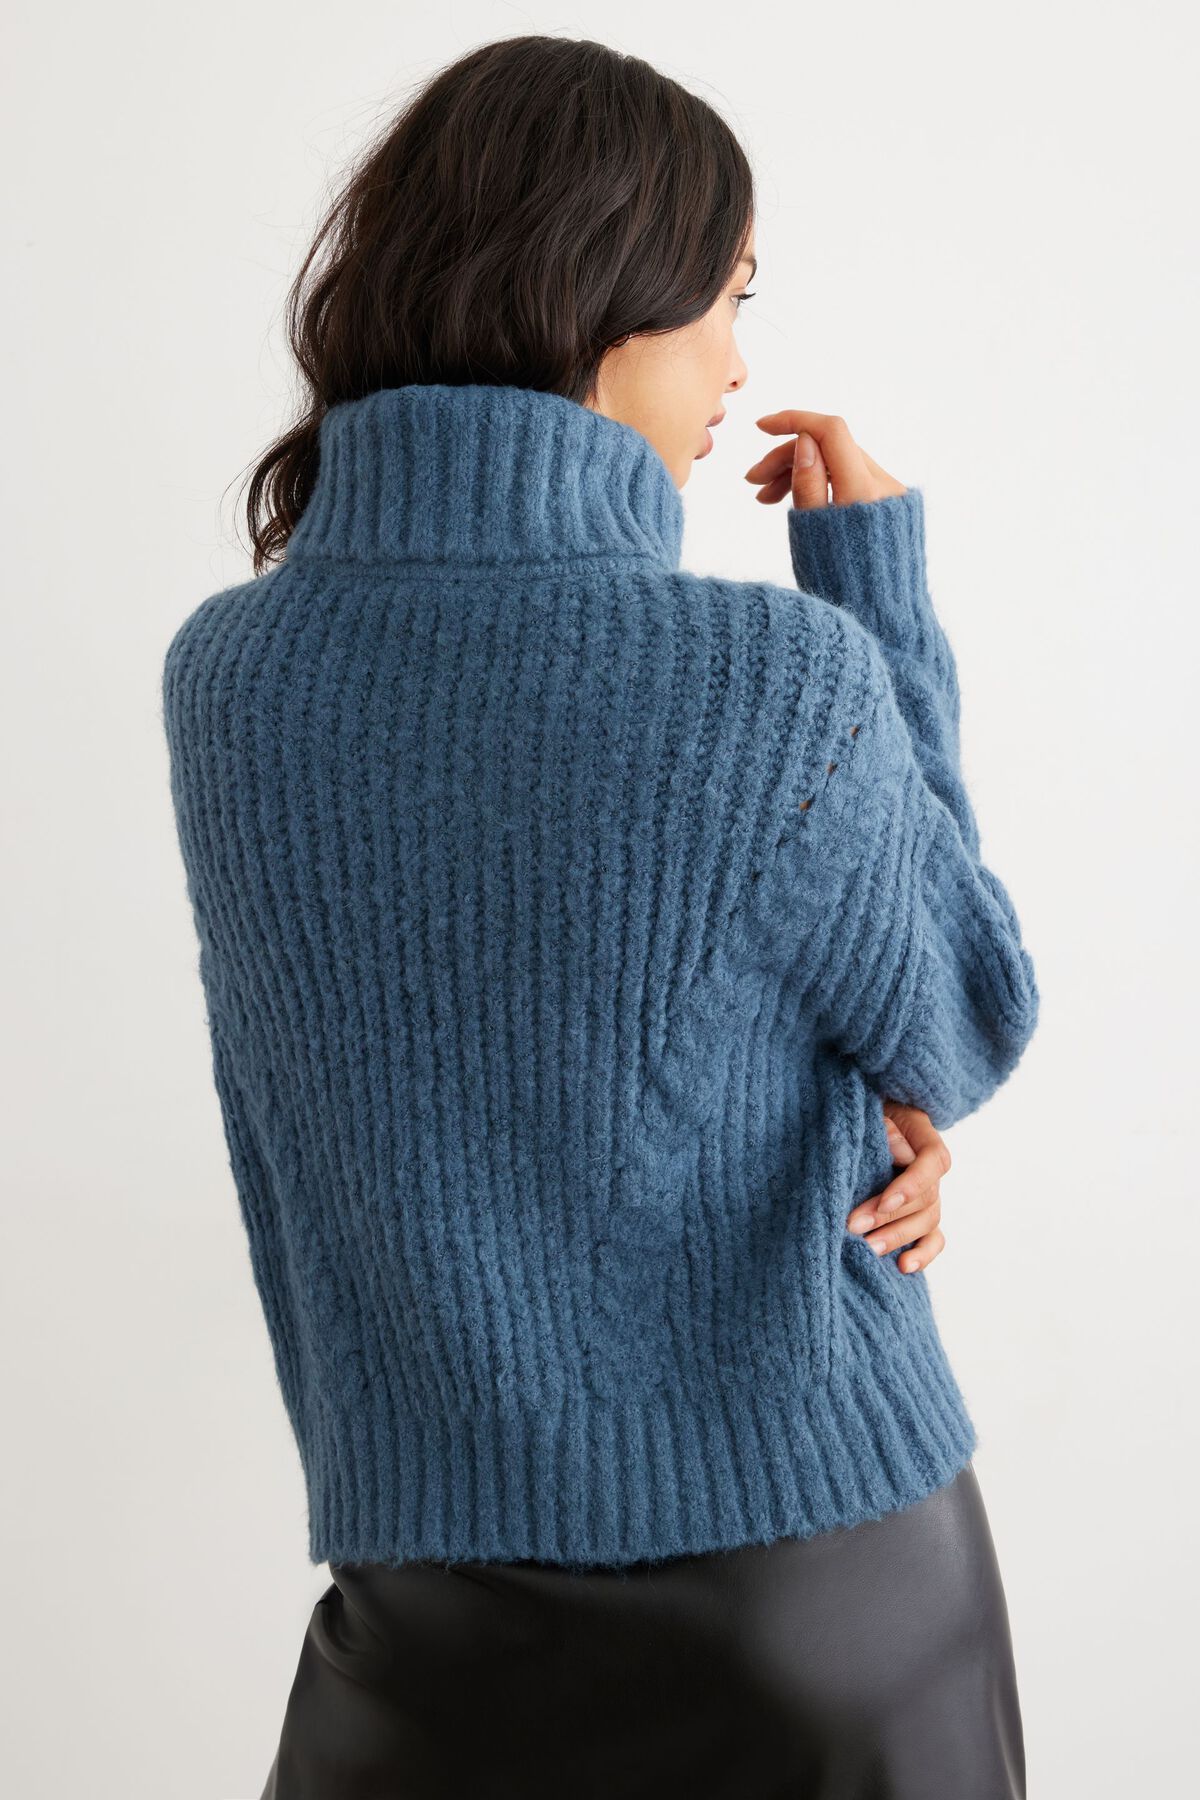 Dynamite Cable Knit Turtleneck Sweater. 4